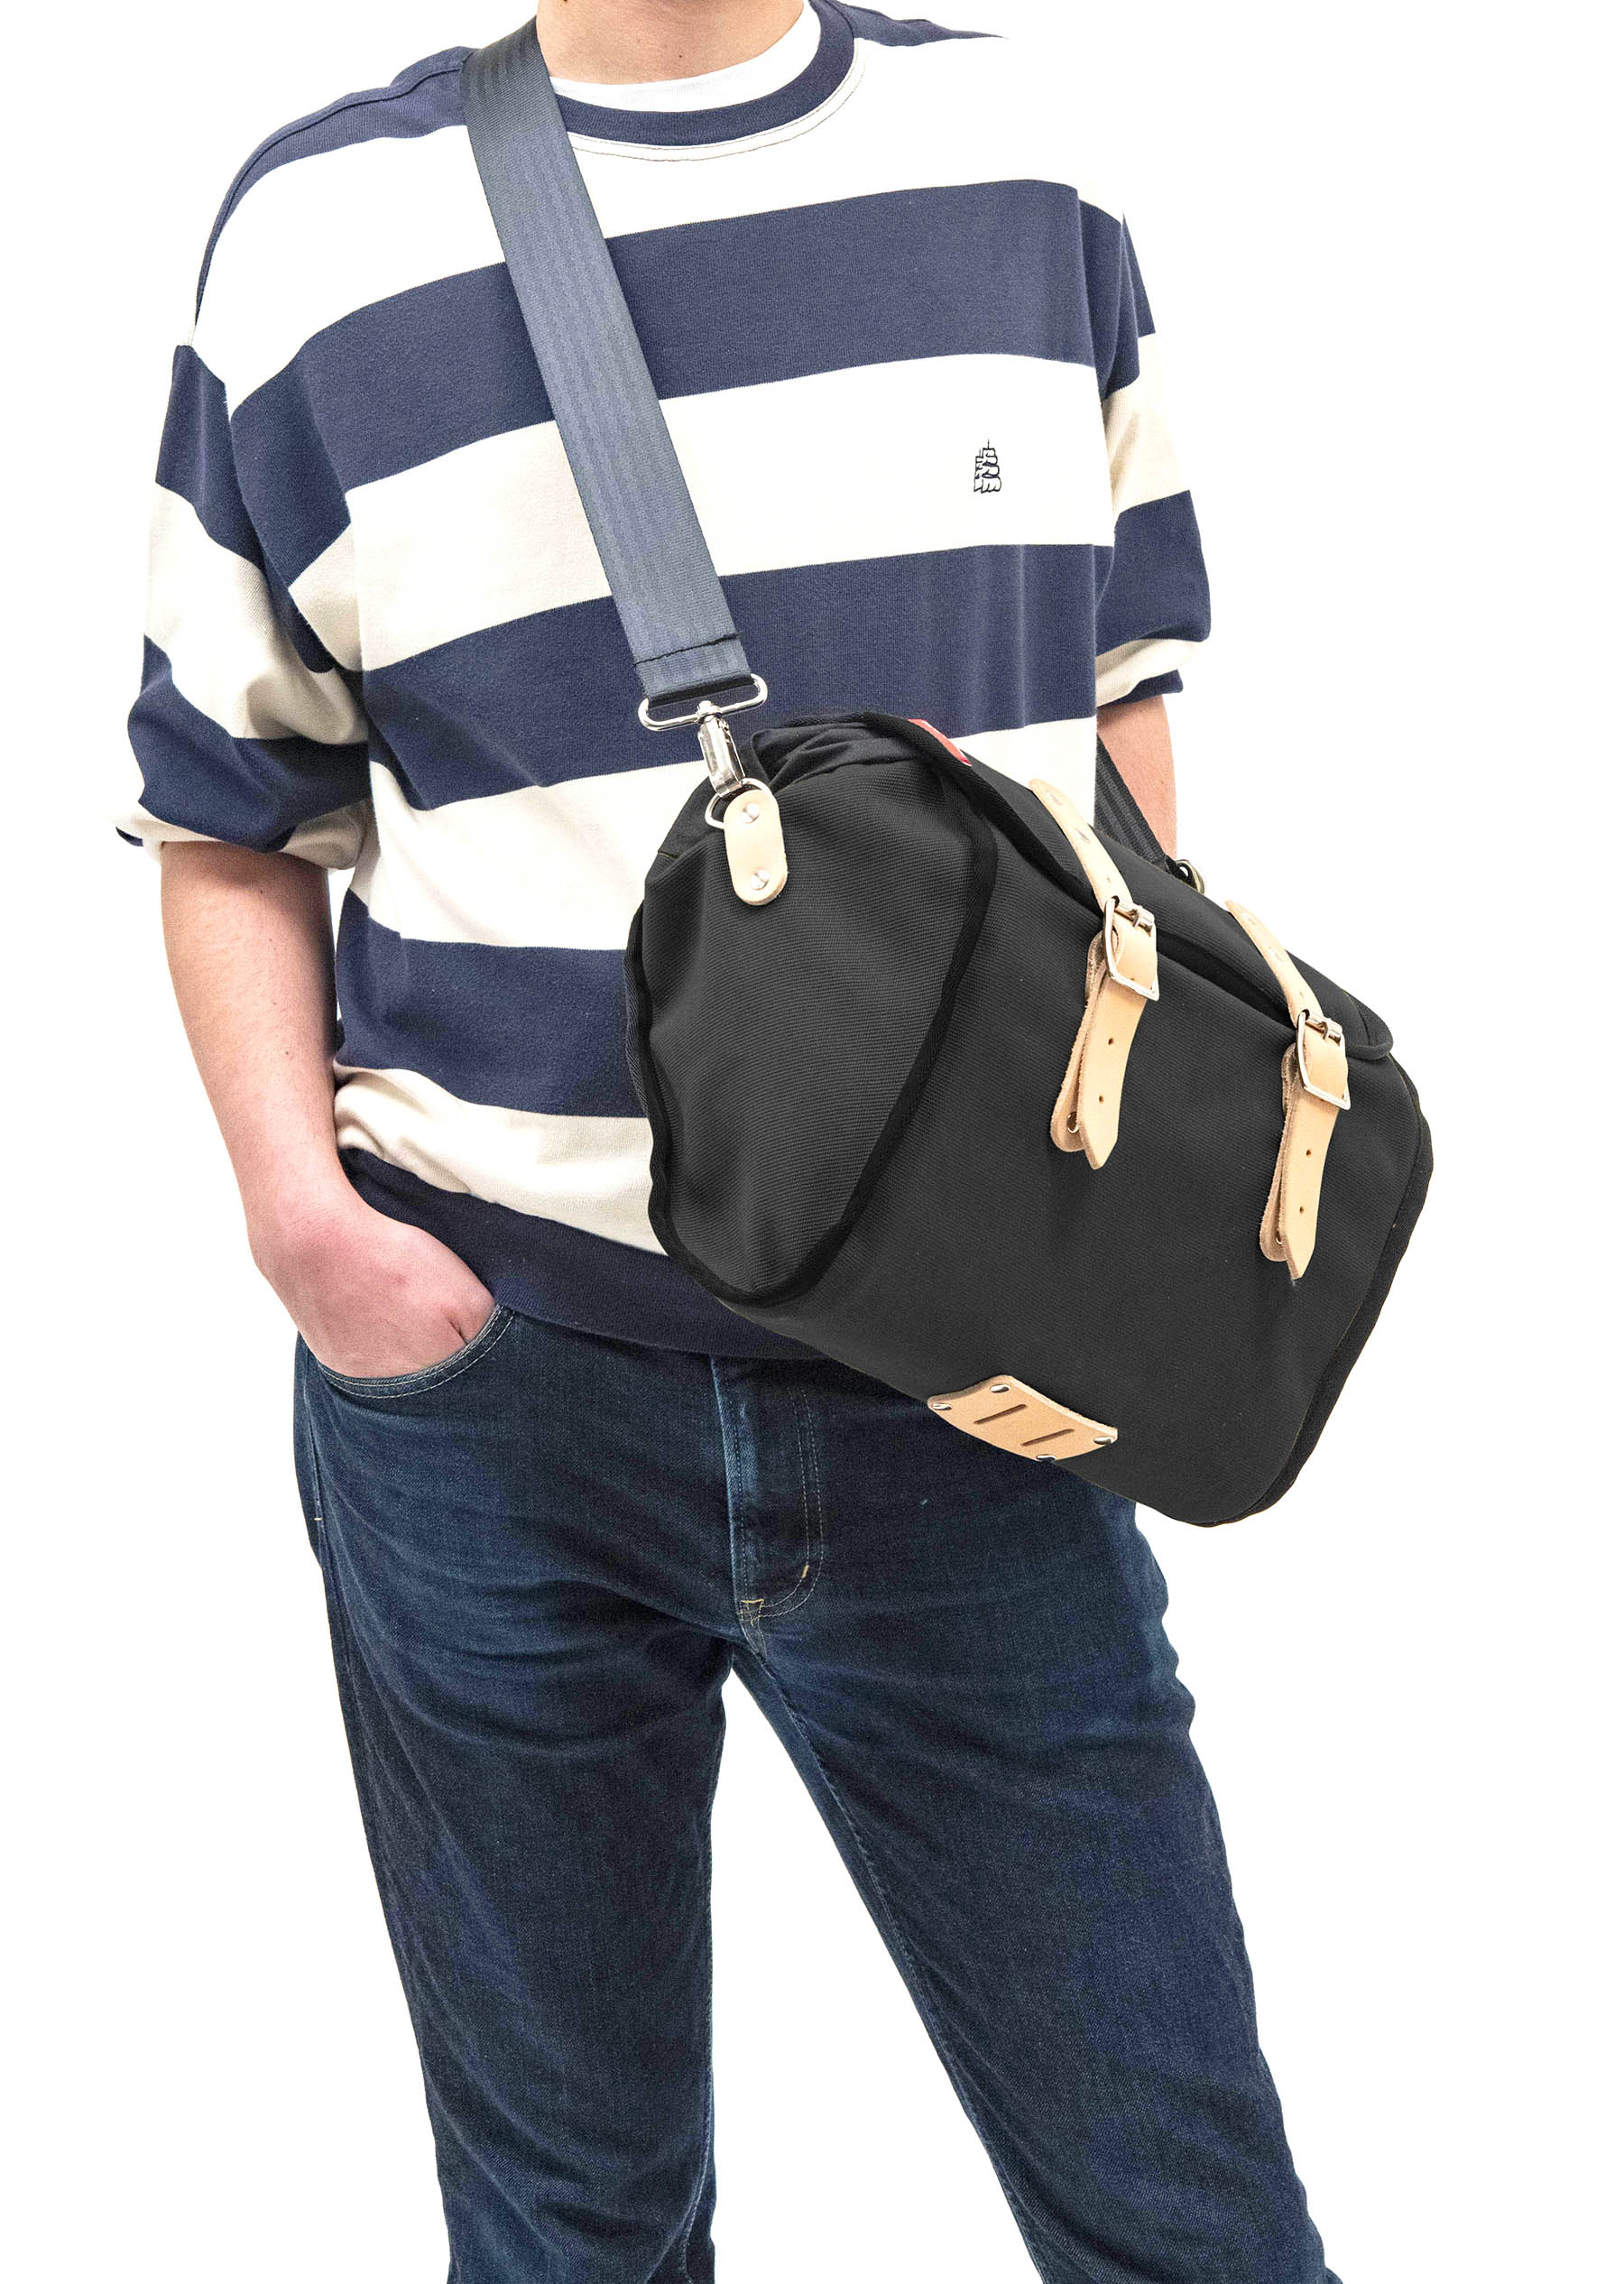 Model wearing the Frost and Sekers Saddle bag using the included shoulder strap